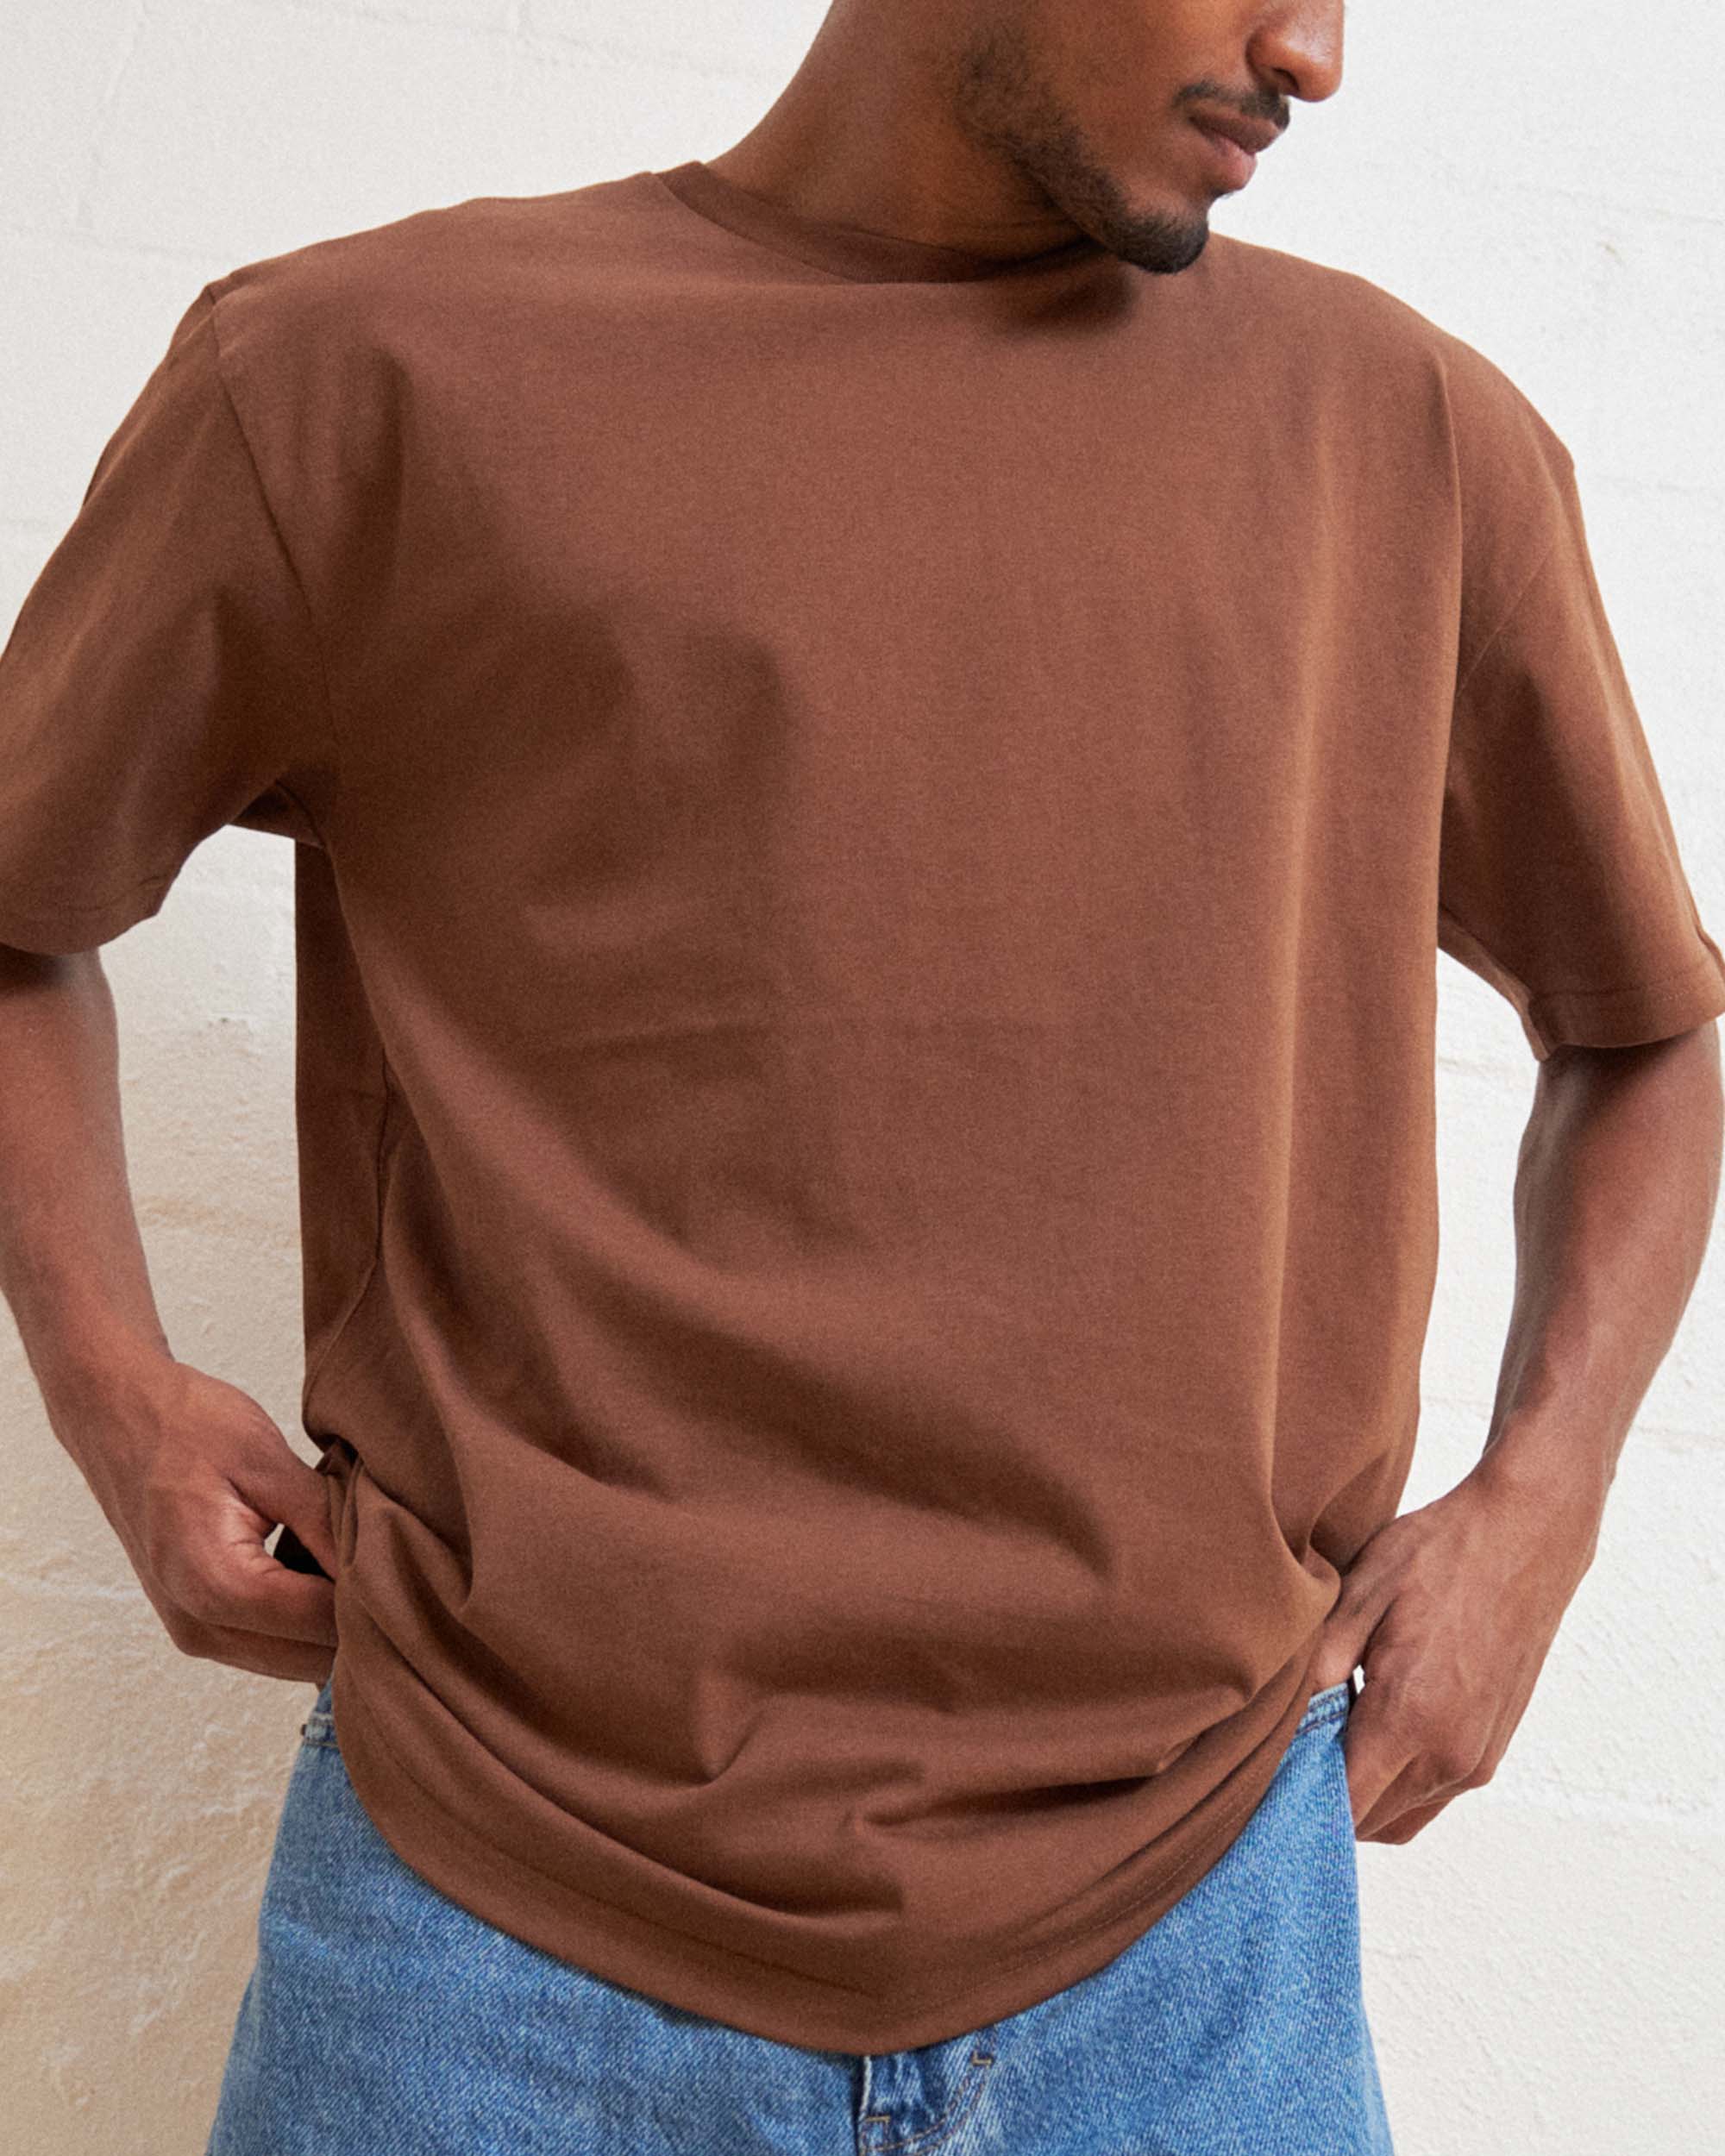 Classic Tee 8 Pack: Brown, Navy, Black, Charcoal, White